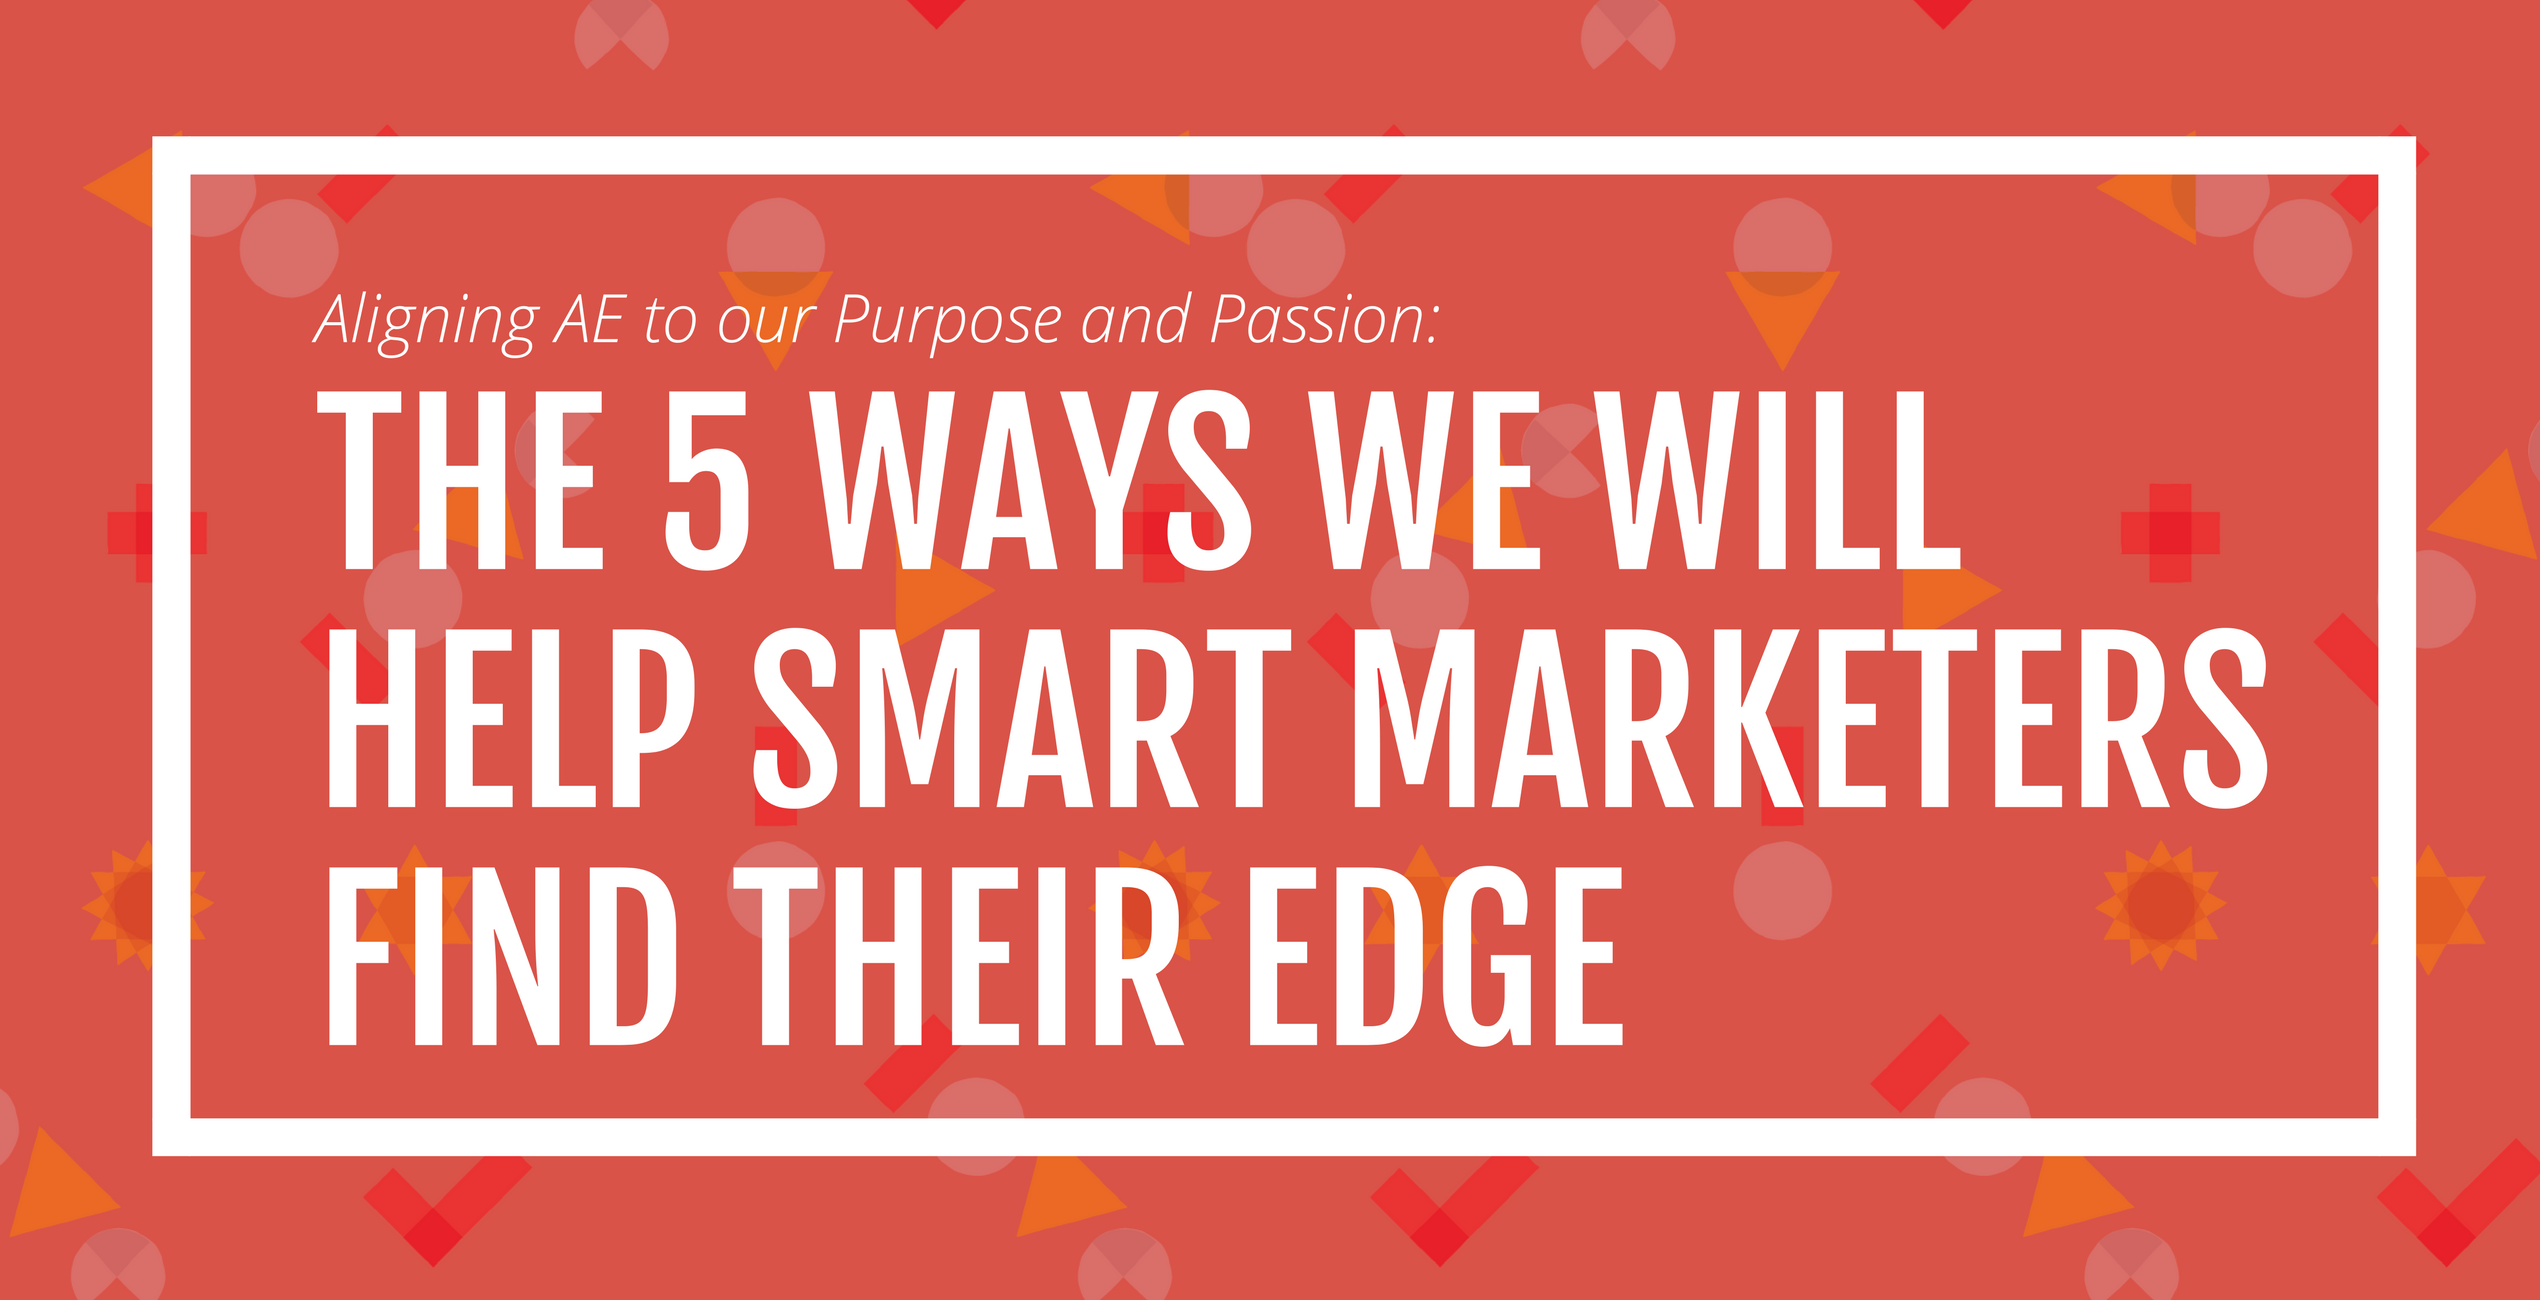 Our Purpose and Passion: How We’re Driven to Help Digital Marketers Find Their Edge